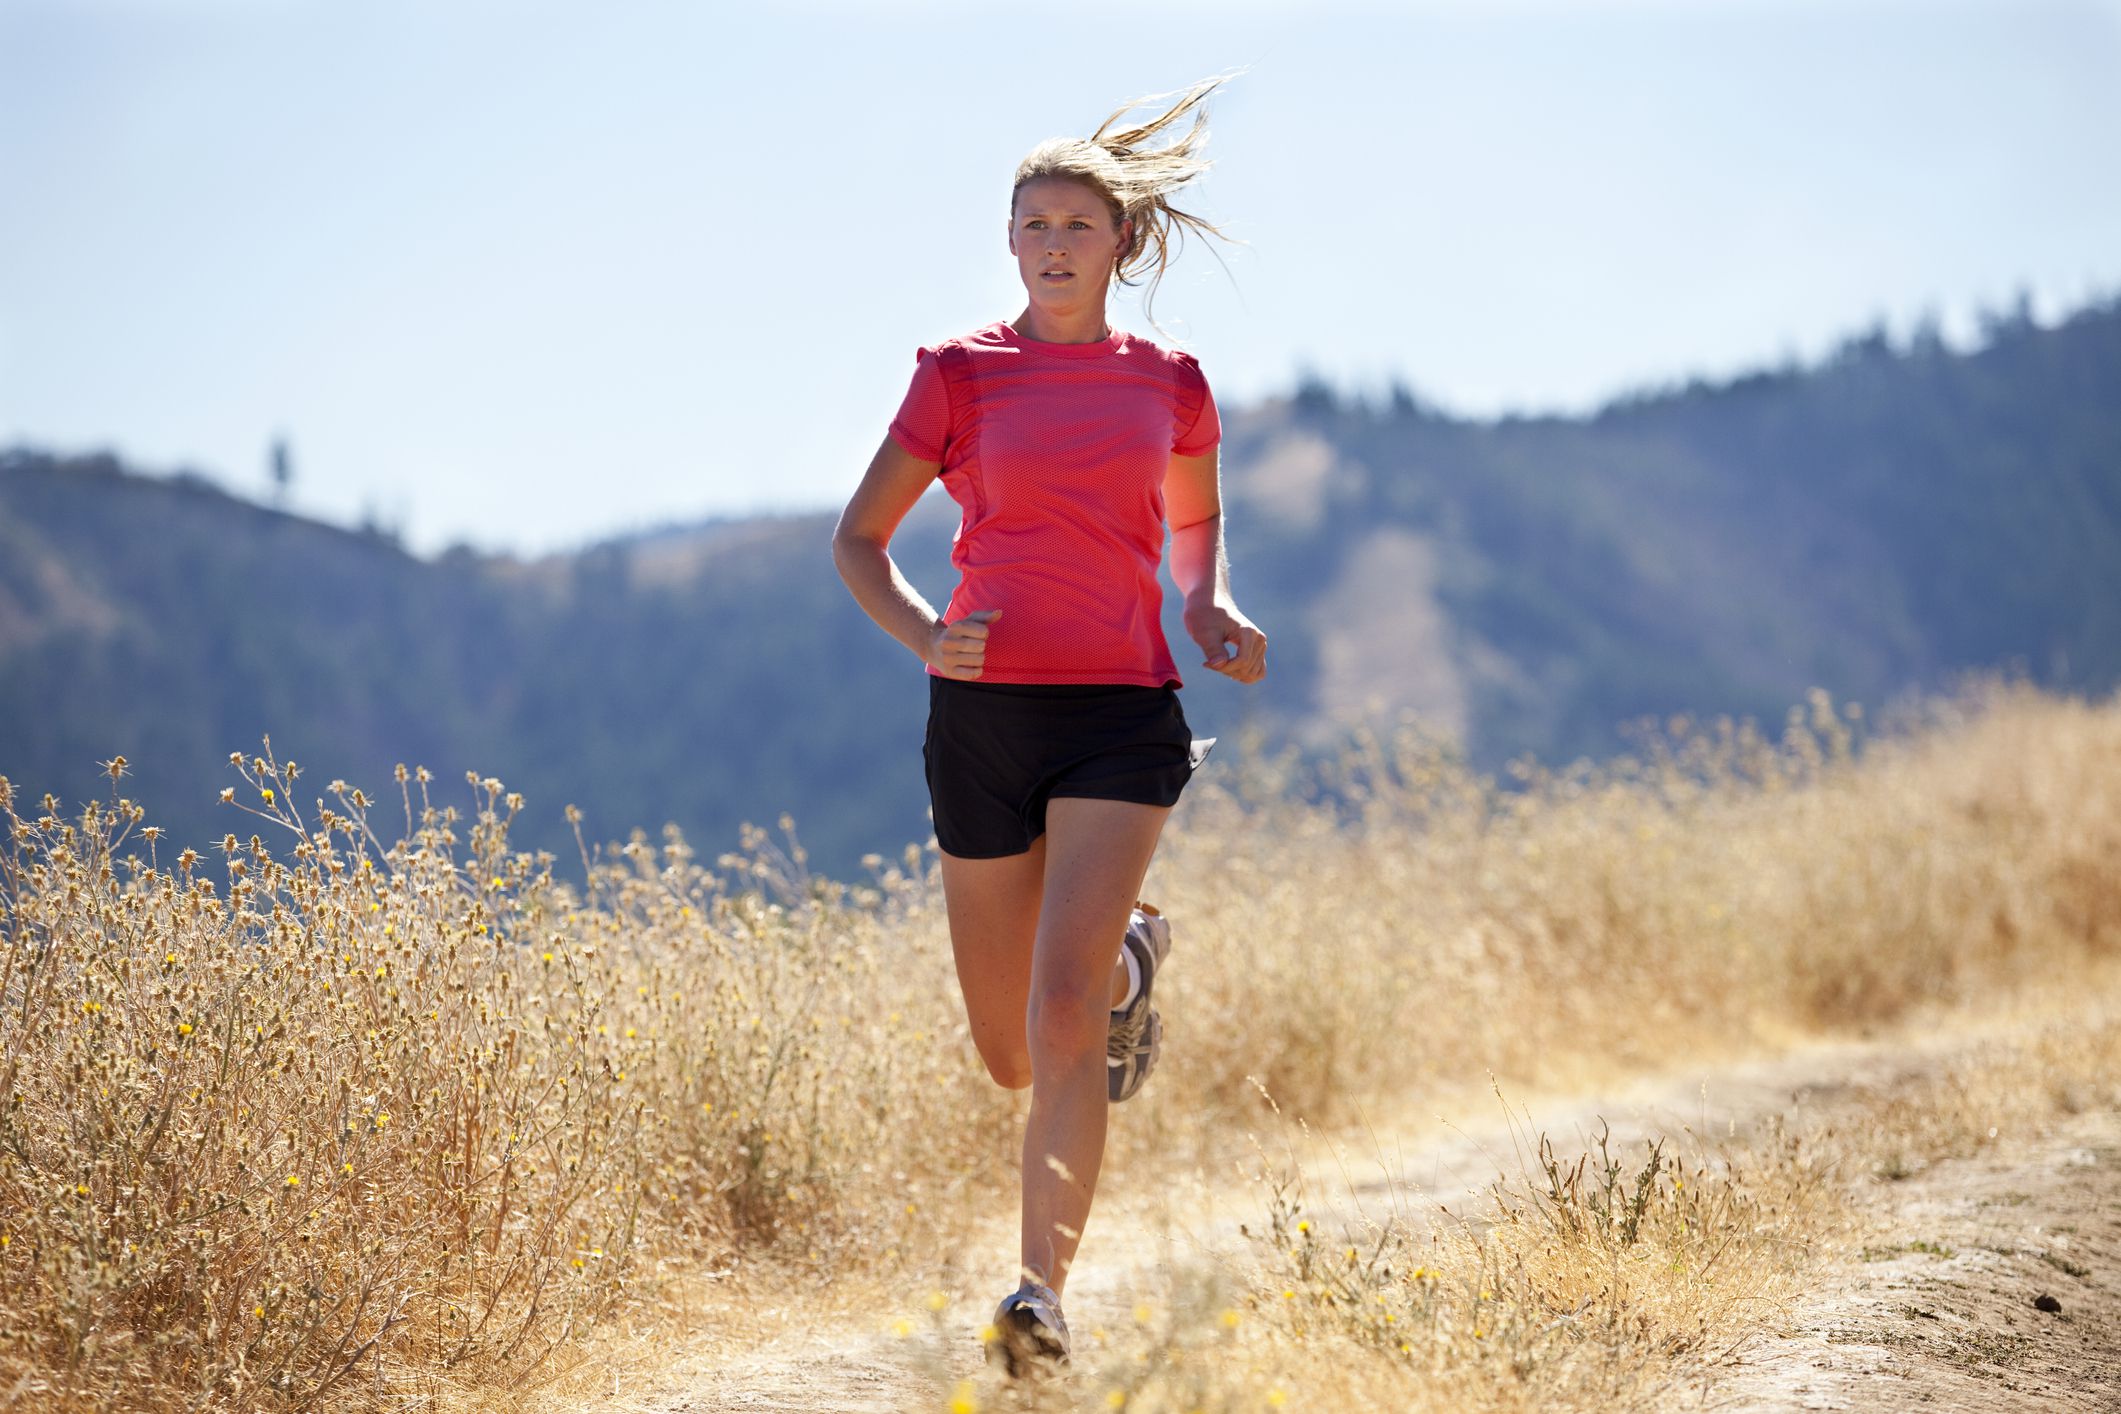 How to Dress for Hot Weather Running